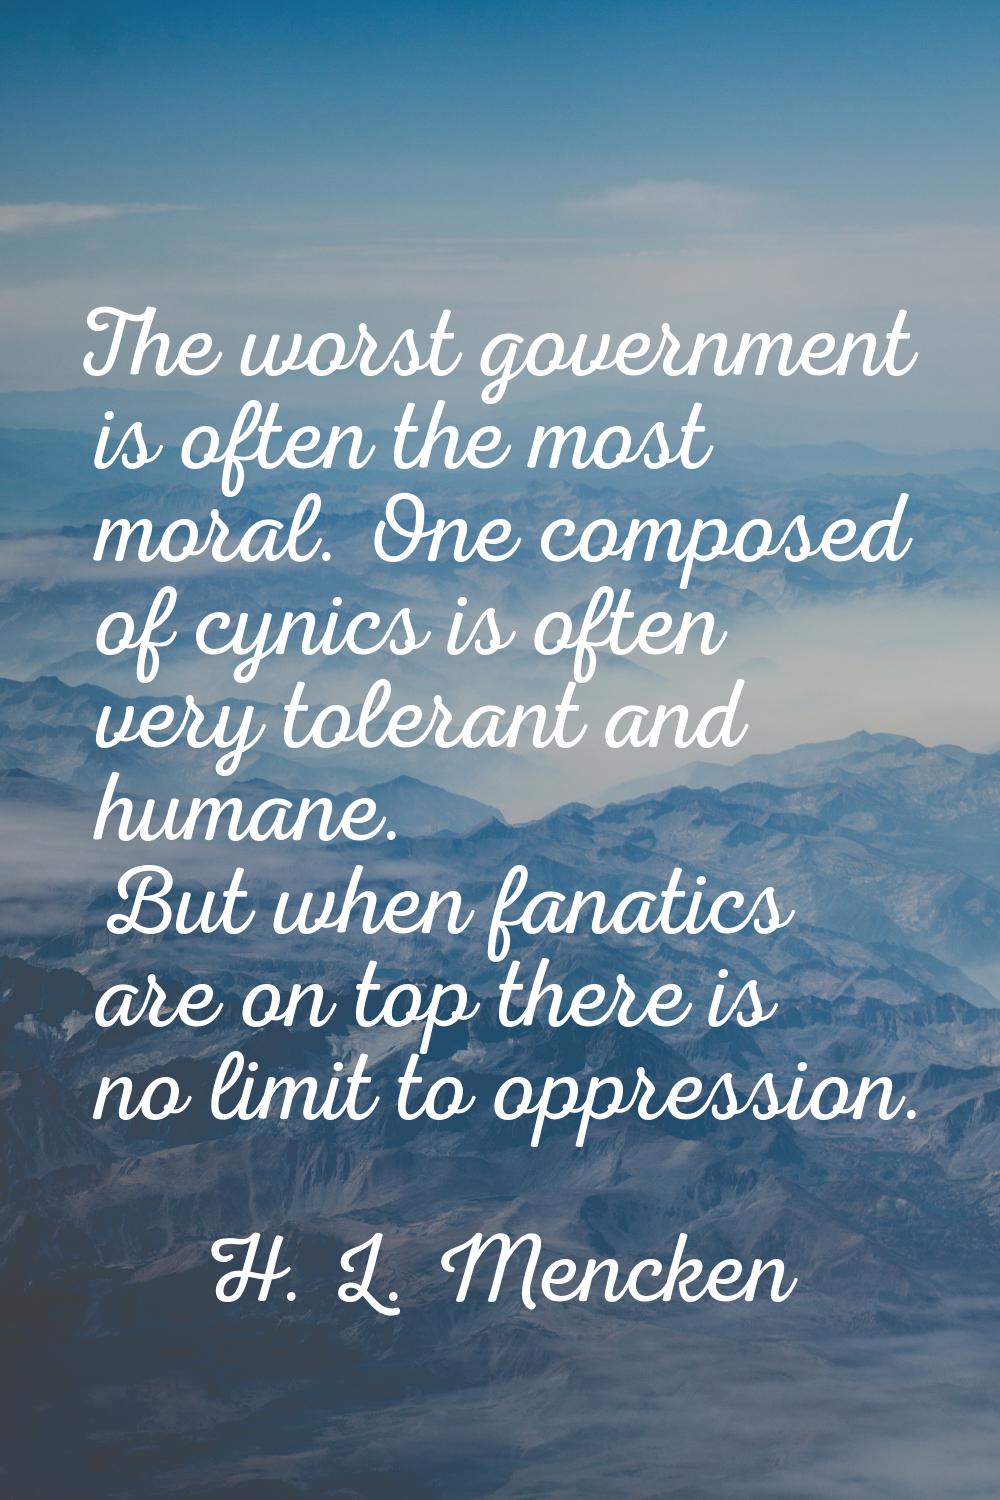 The worst government is often the most moral. One composed of cynics is often very tolerant and hum